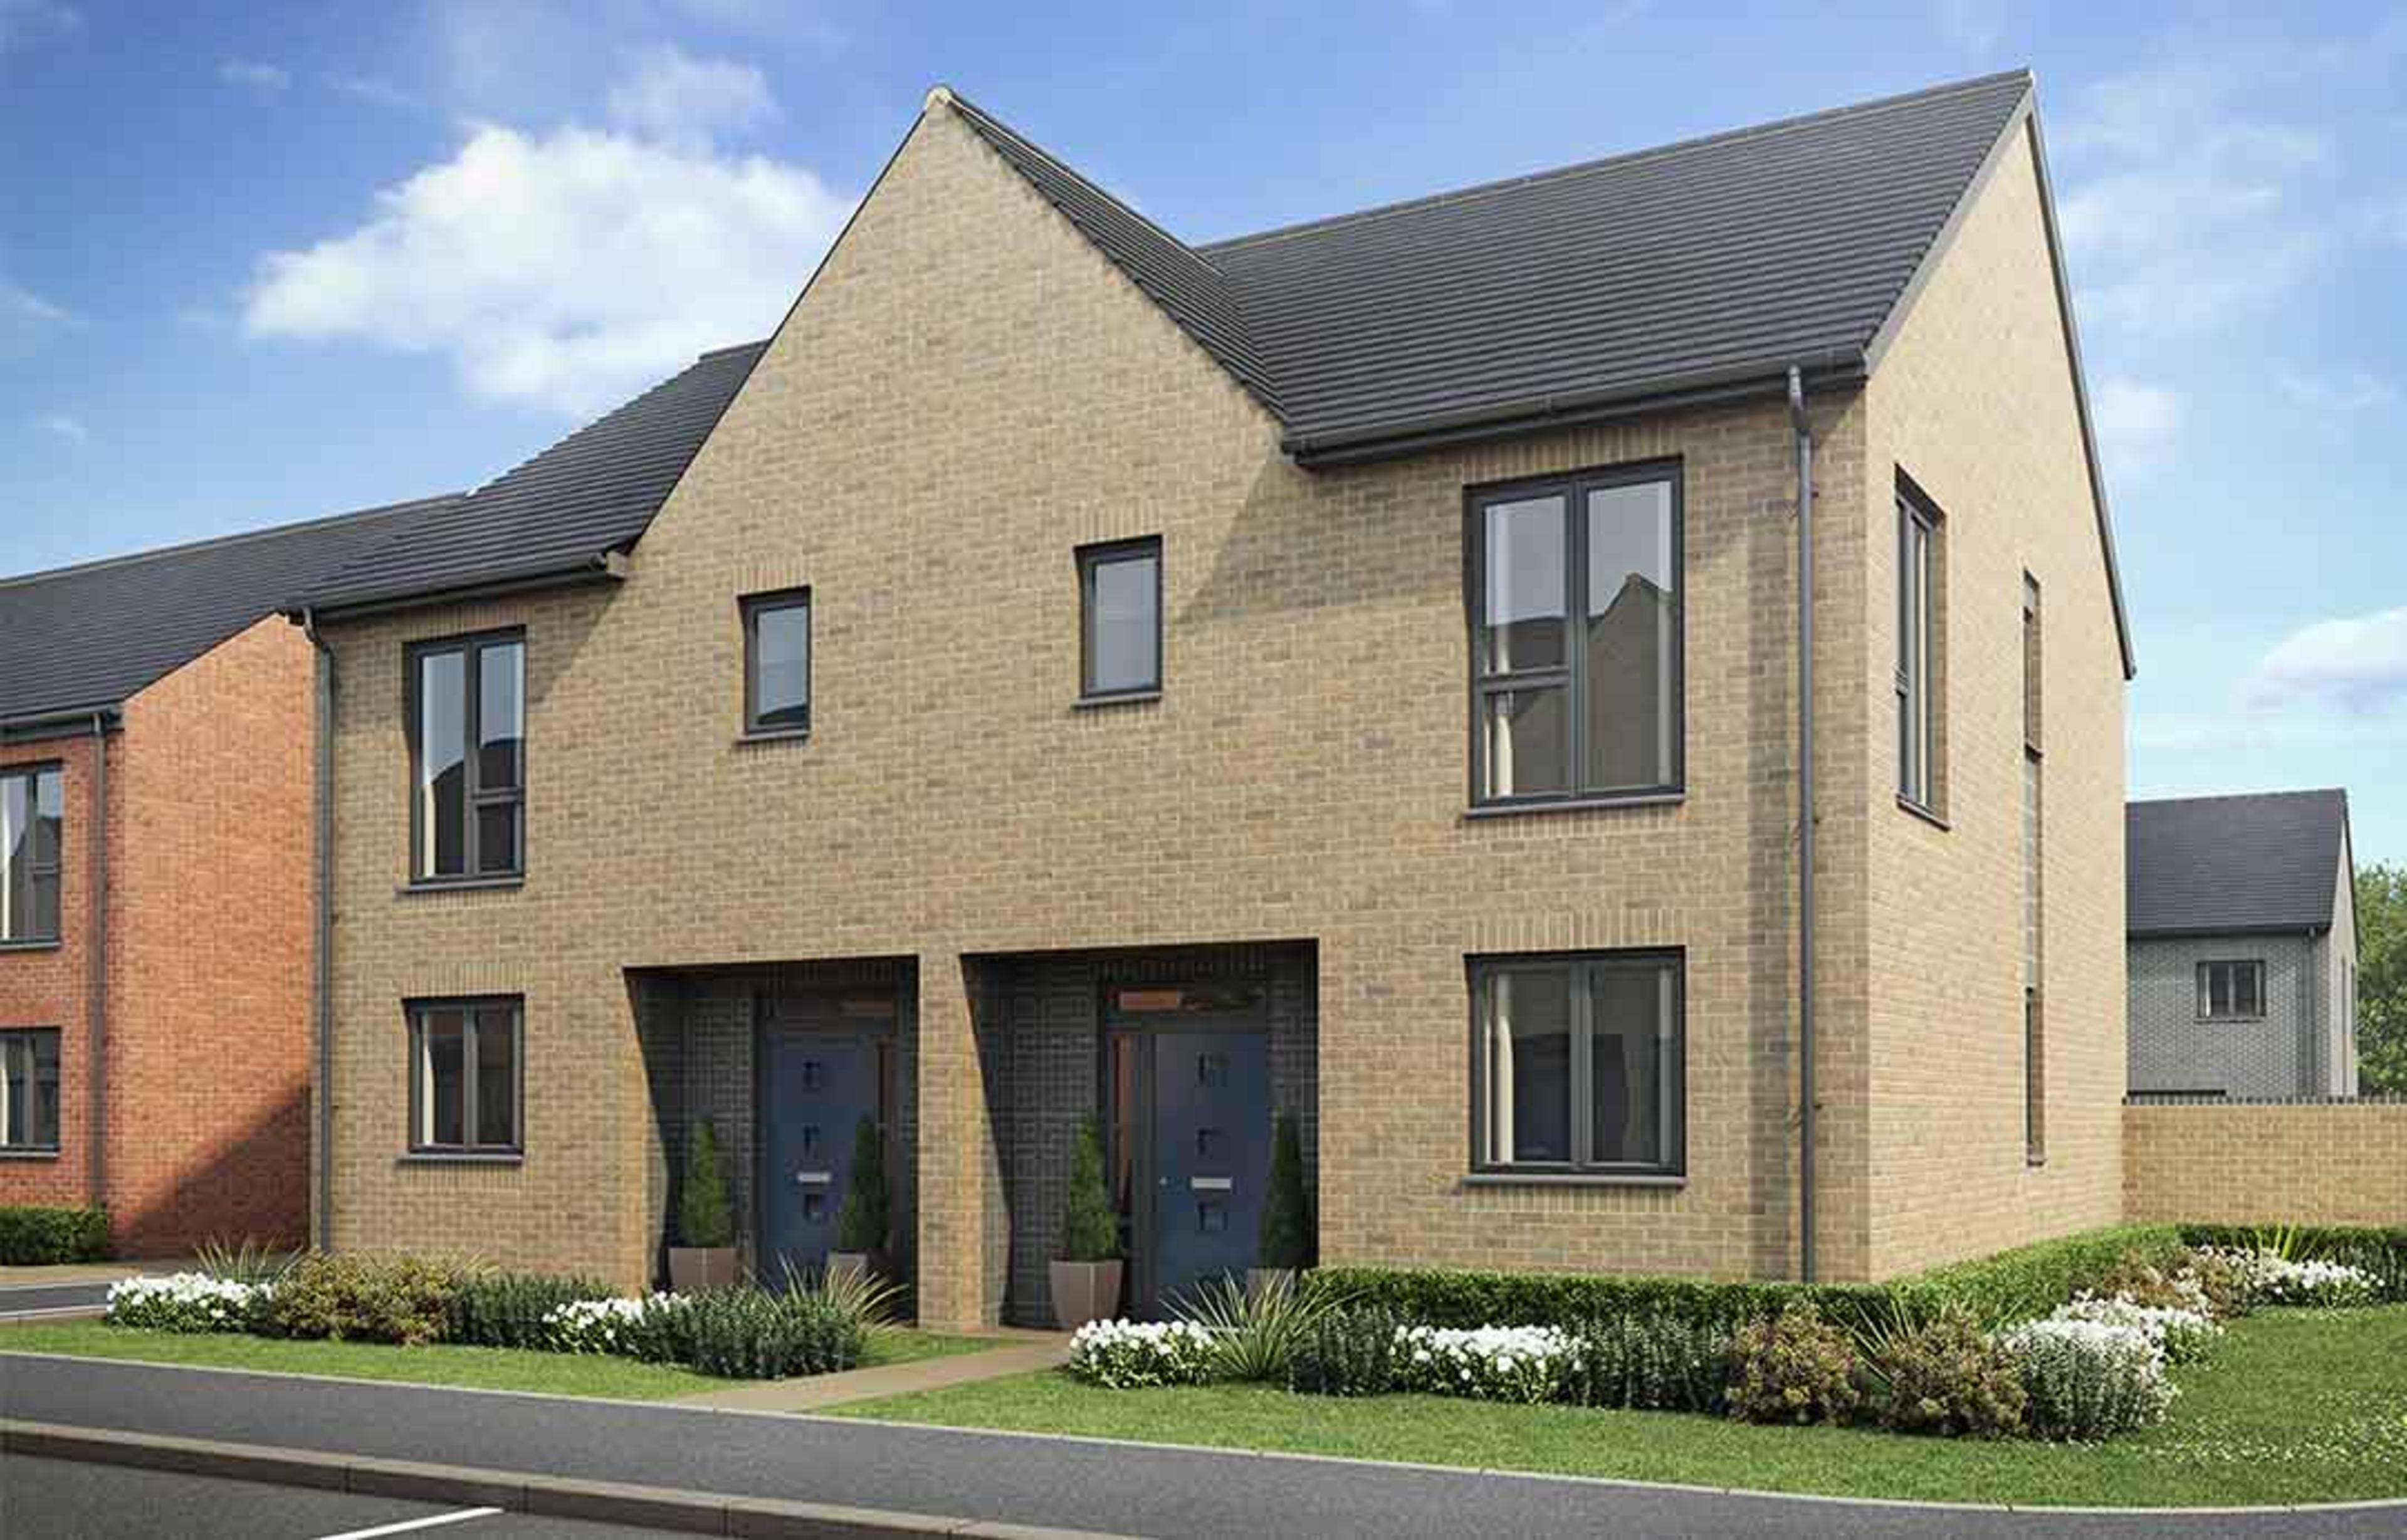 meaux-rise-kingswood-hull-new-persona-homes-beat-exterior-cgi